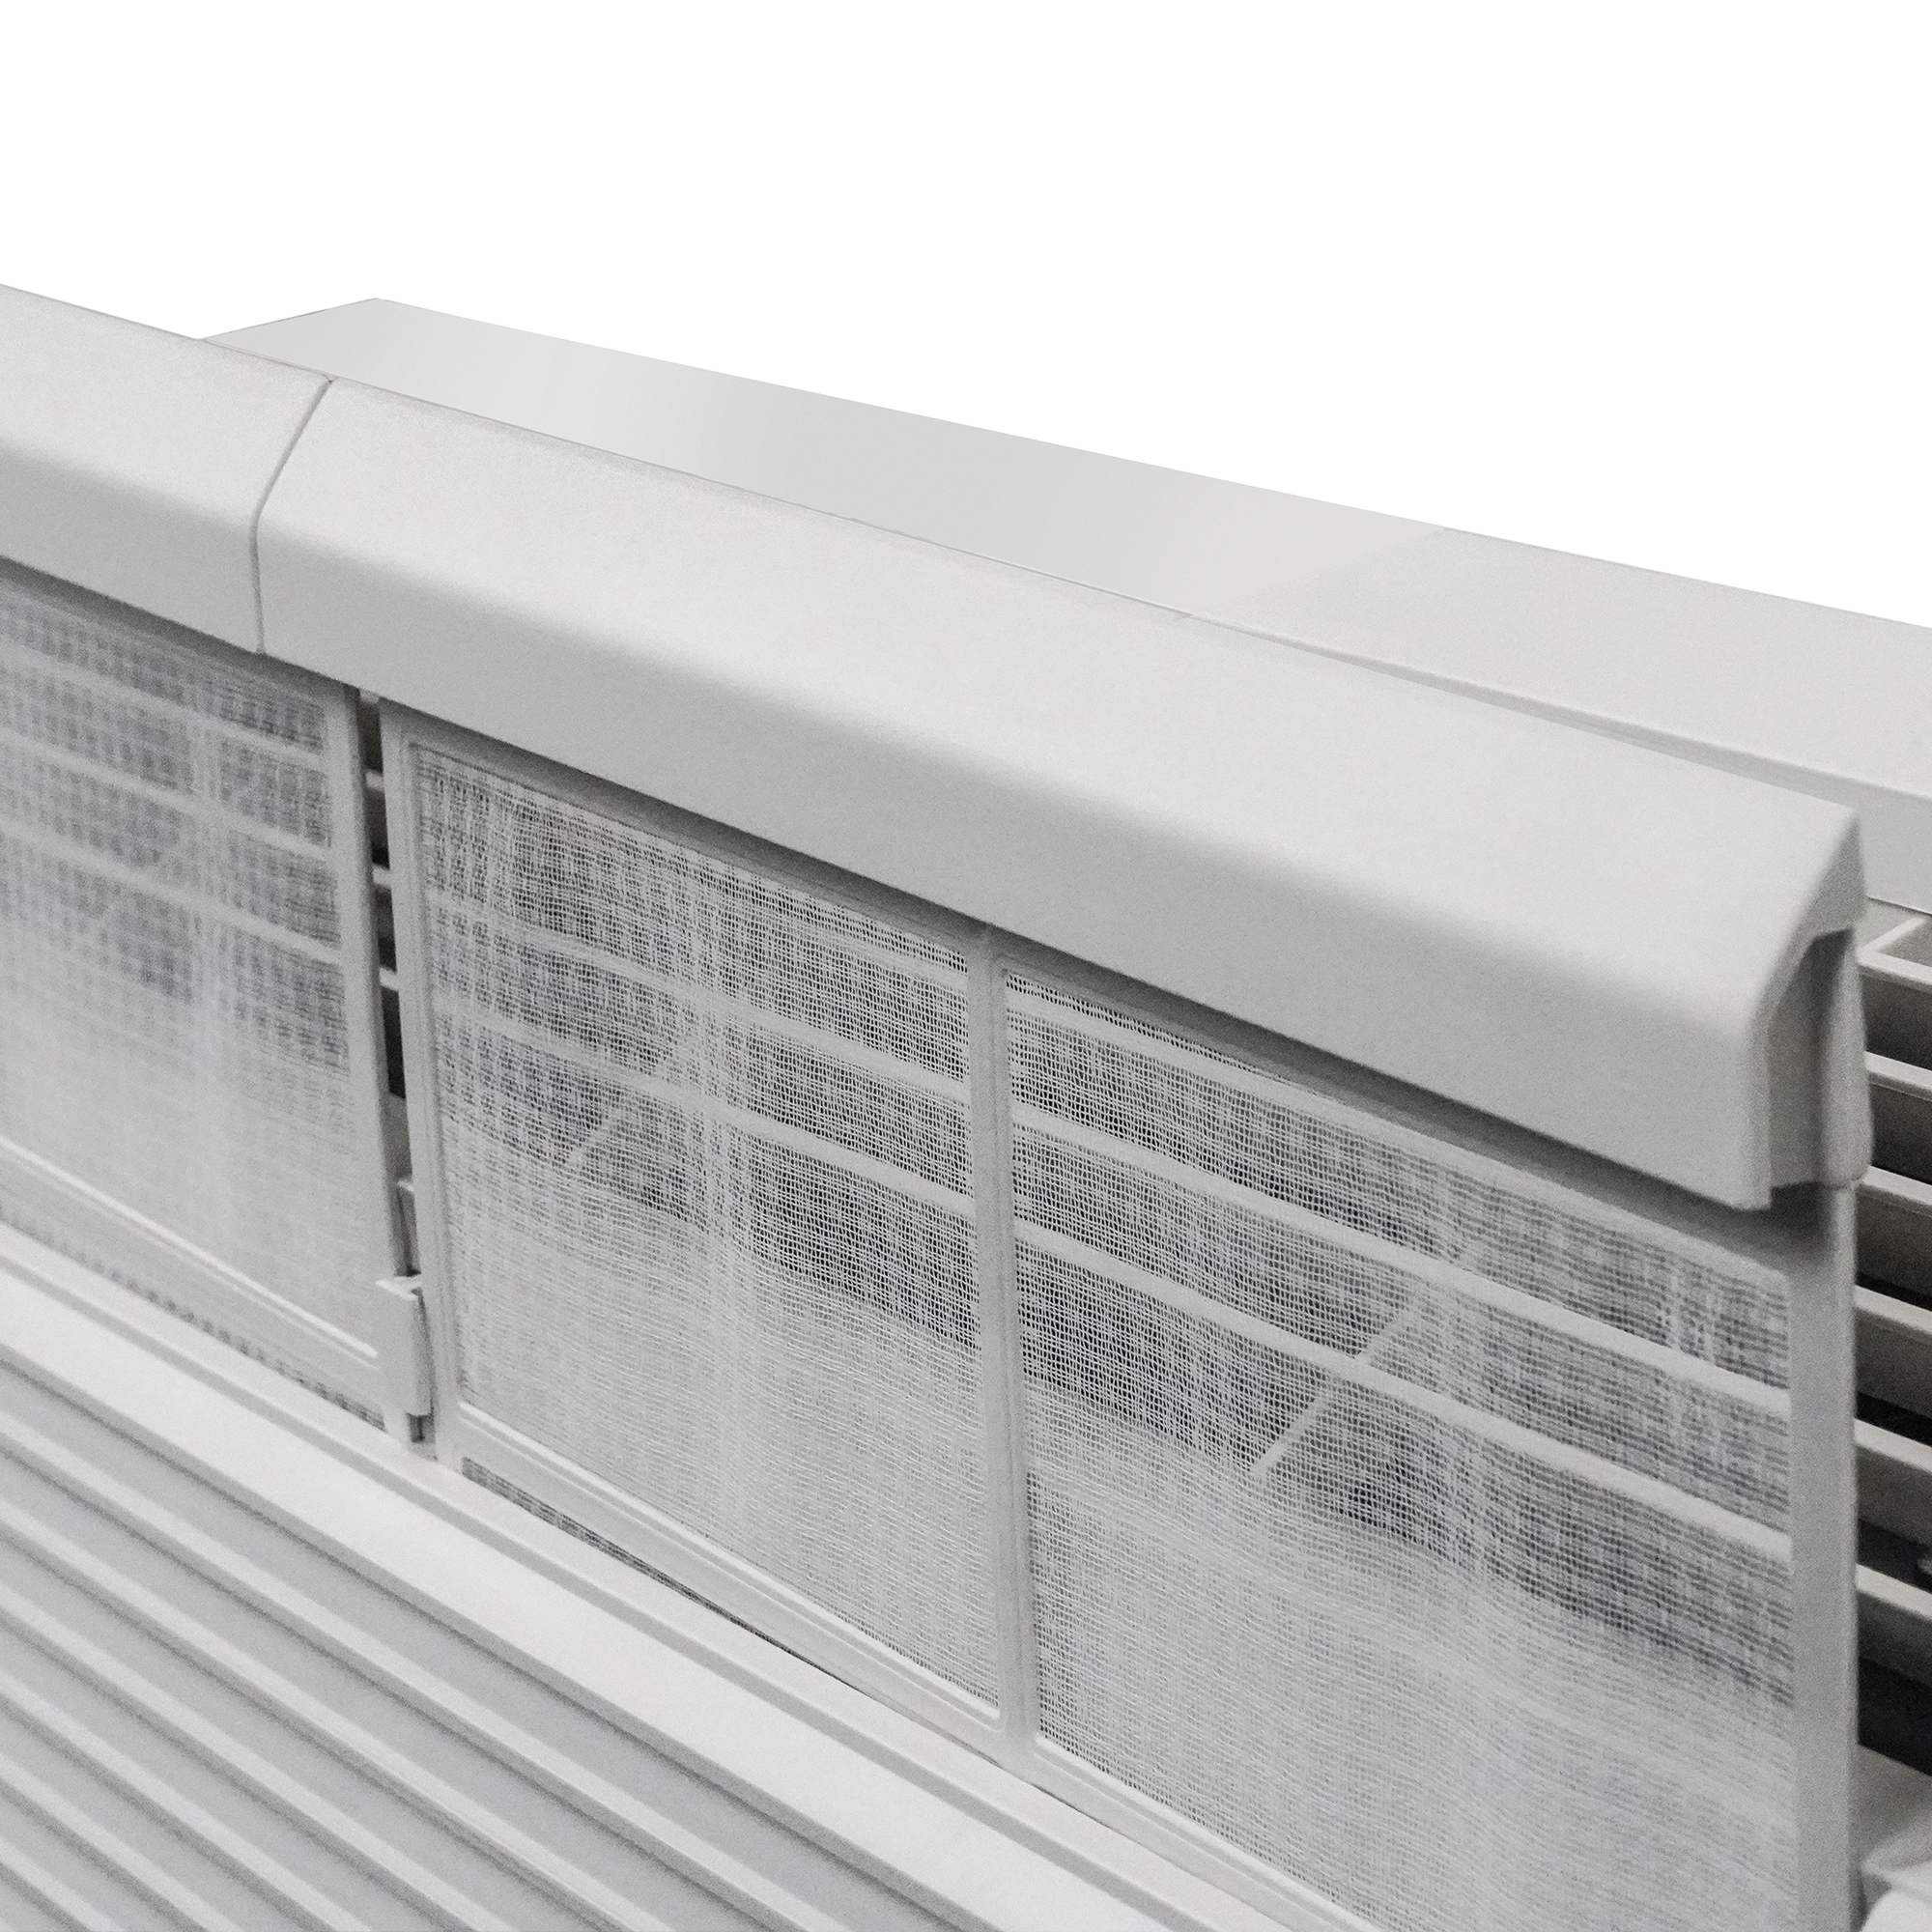 Danby 9,000 BTU Packaged Terminal Air Conditioner with Heat Pump